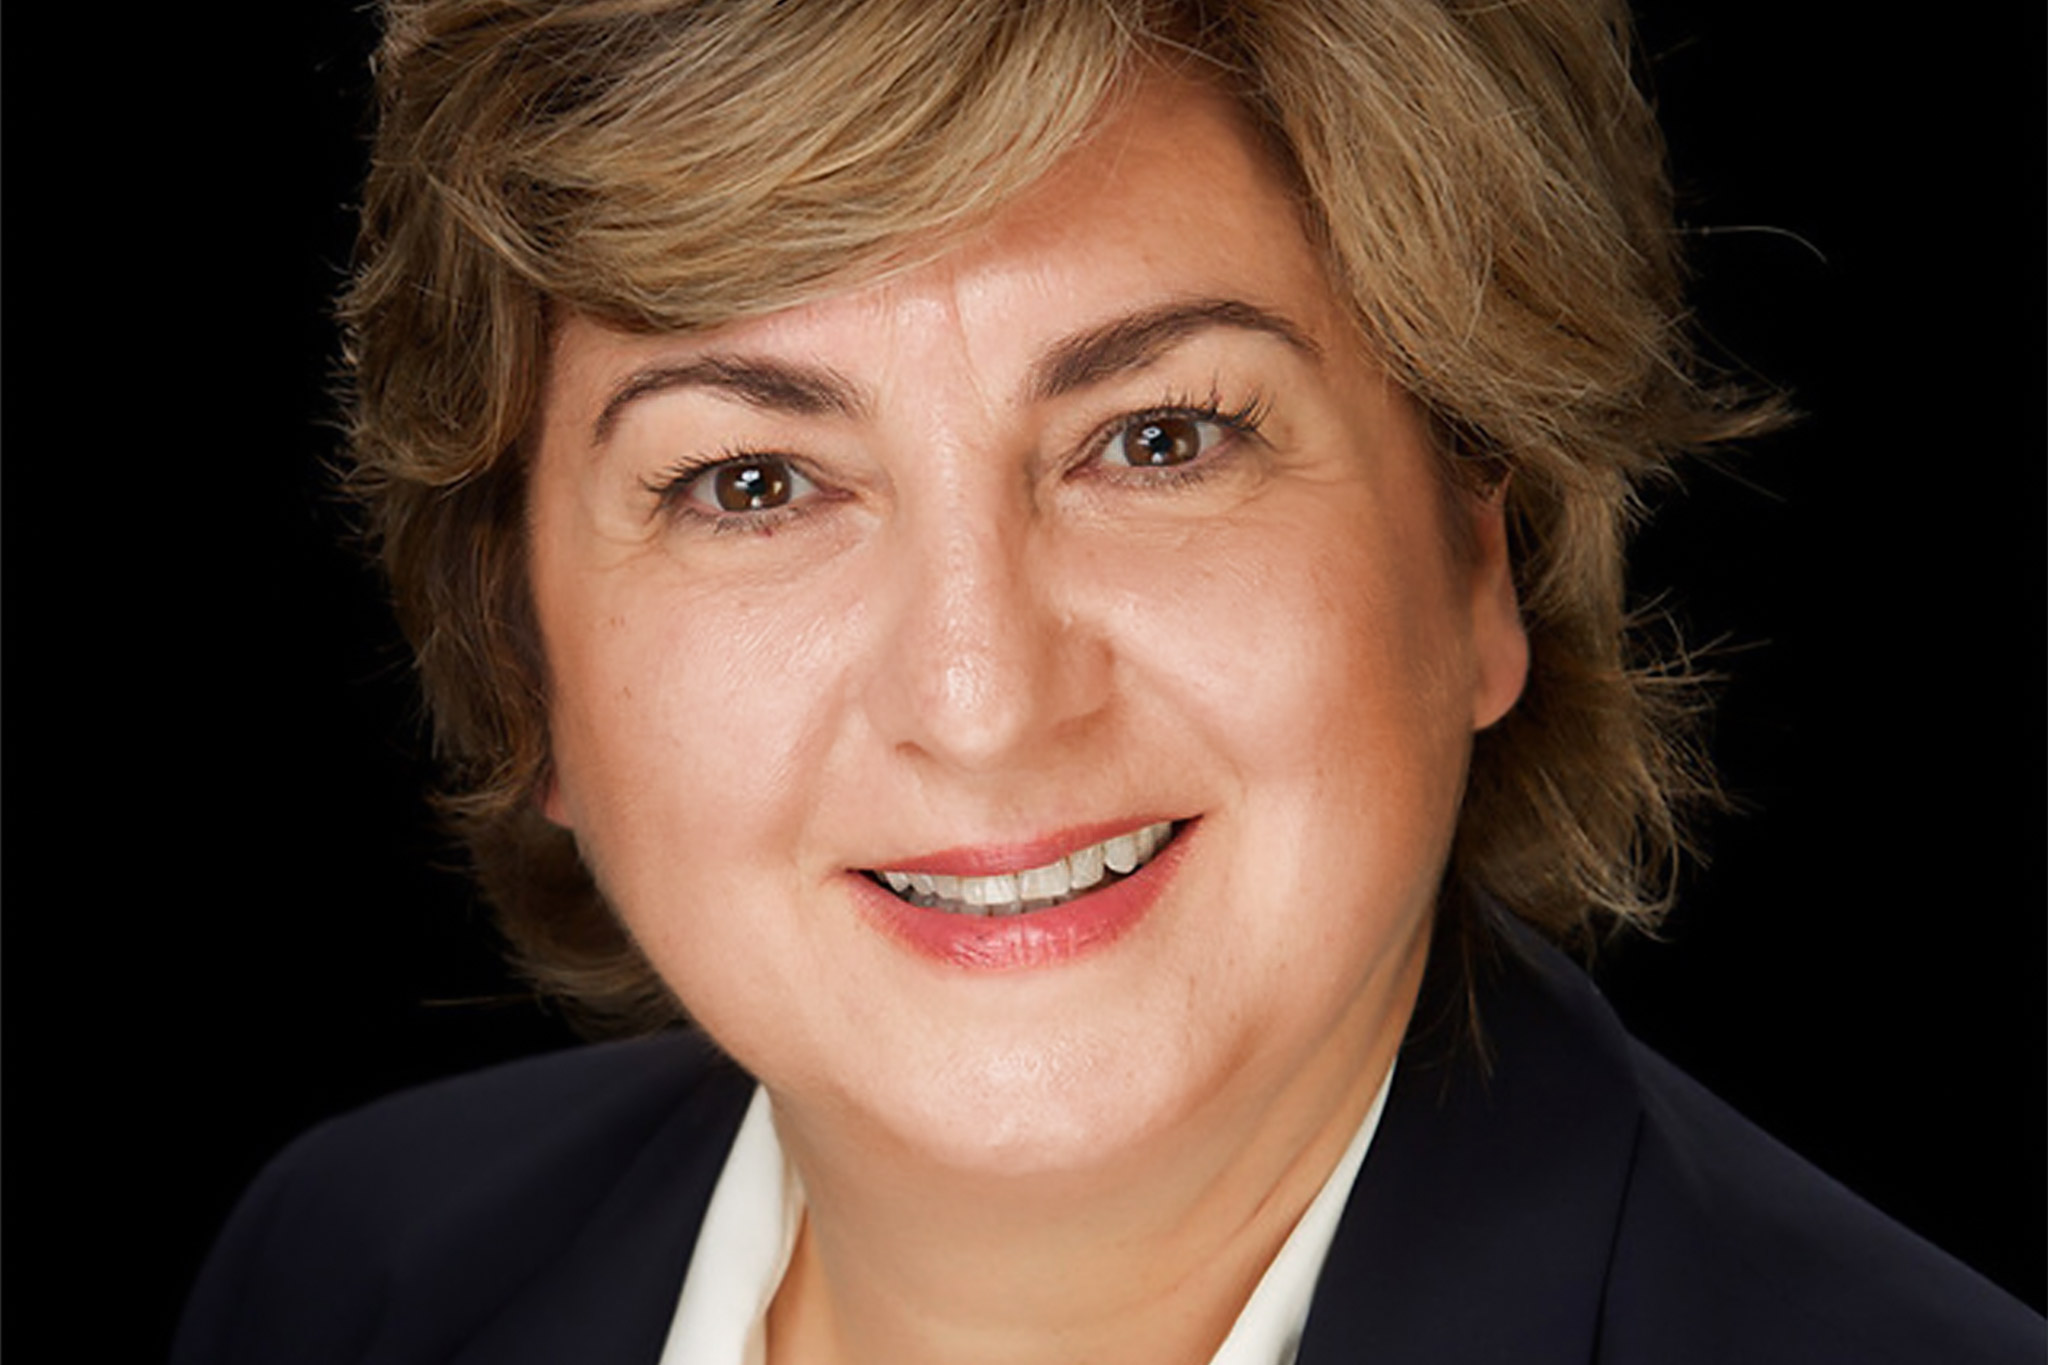 Annamaria Ruffini, President and CEO, Events In & Out.